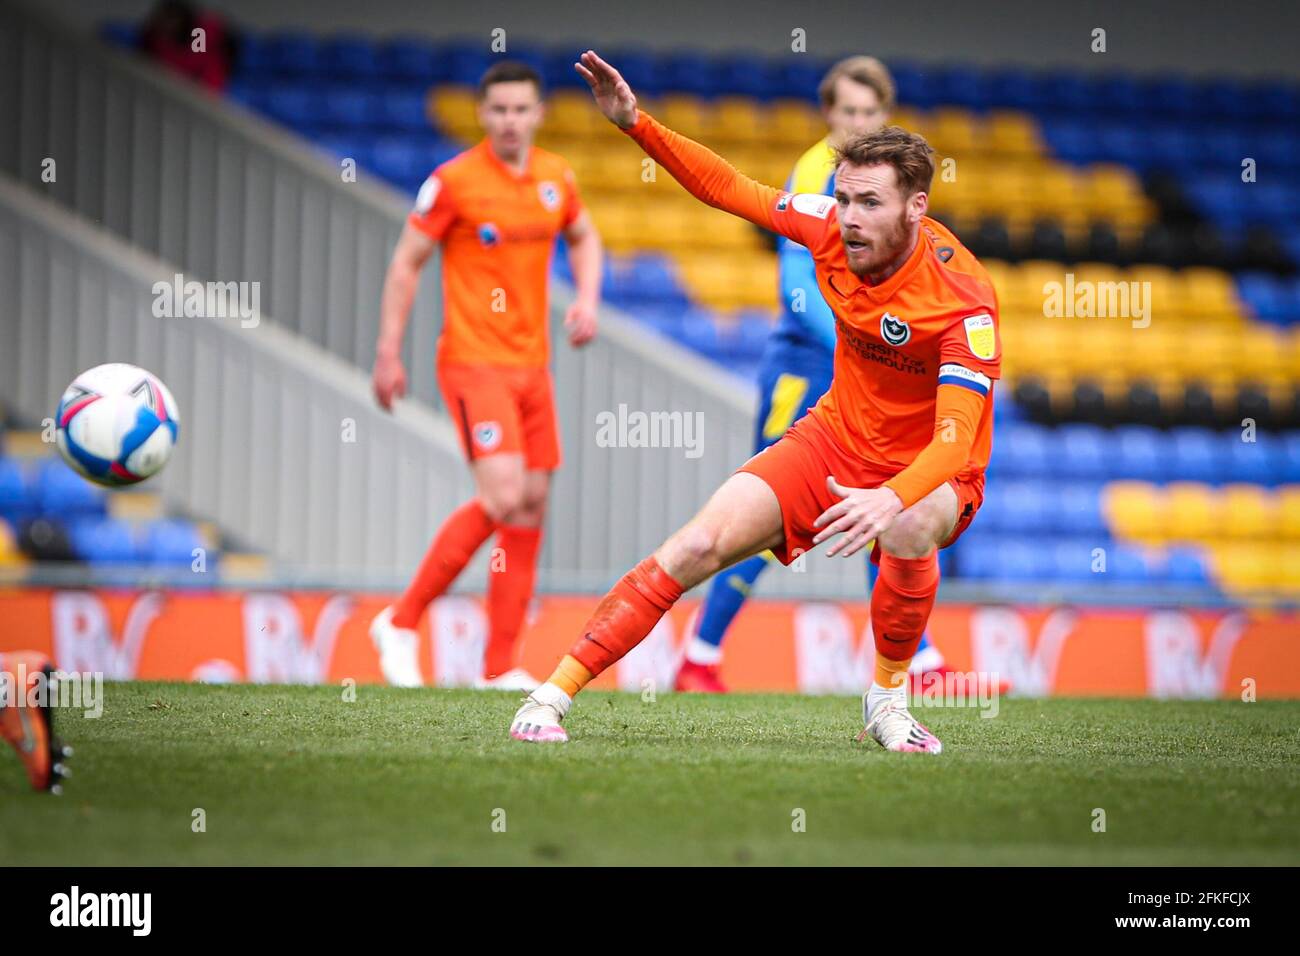 LONDON, UK. MAY 1ST Tom Naylor of Portsmouth during the Sky Bet League 1 match between AFC Wimbledon and Portsmouth at the Kingsmeadow Stadium, Kingston on Saturday 1st May 2021. (Credit: Tom West | MI News) Credit: MI News & Sport /Alamy Live News Stock Photo